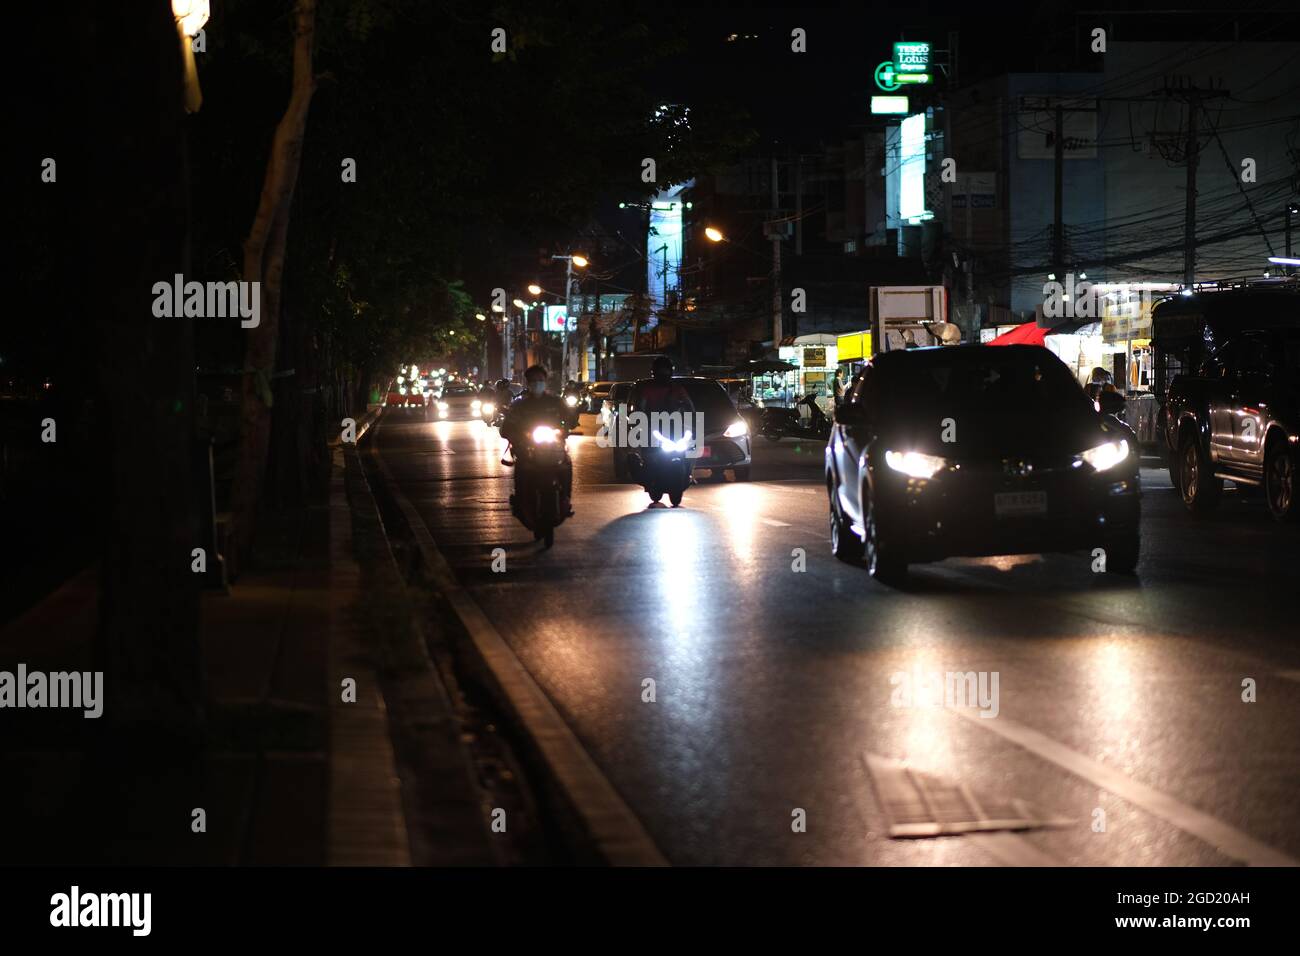 A road in big city at late evening: heavy traffic under a big trees in Chiang Mai, Thailand Stock Photo